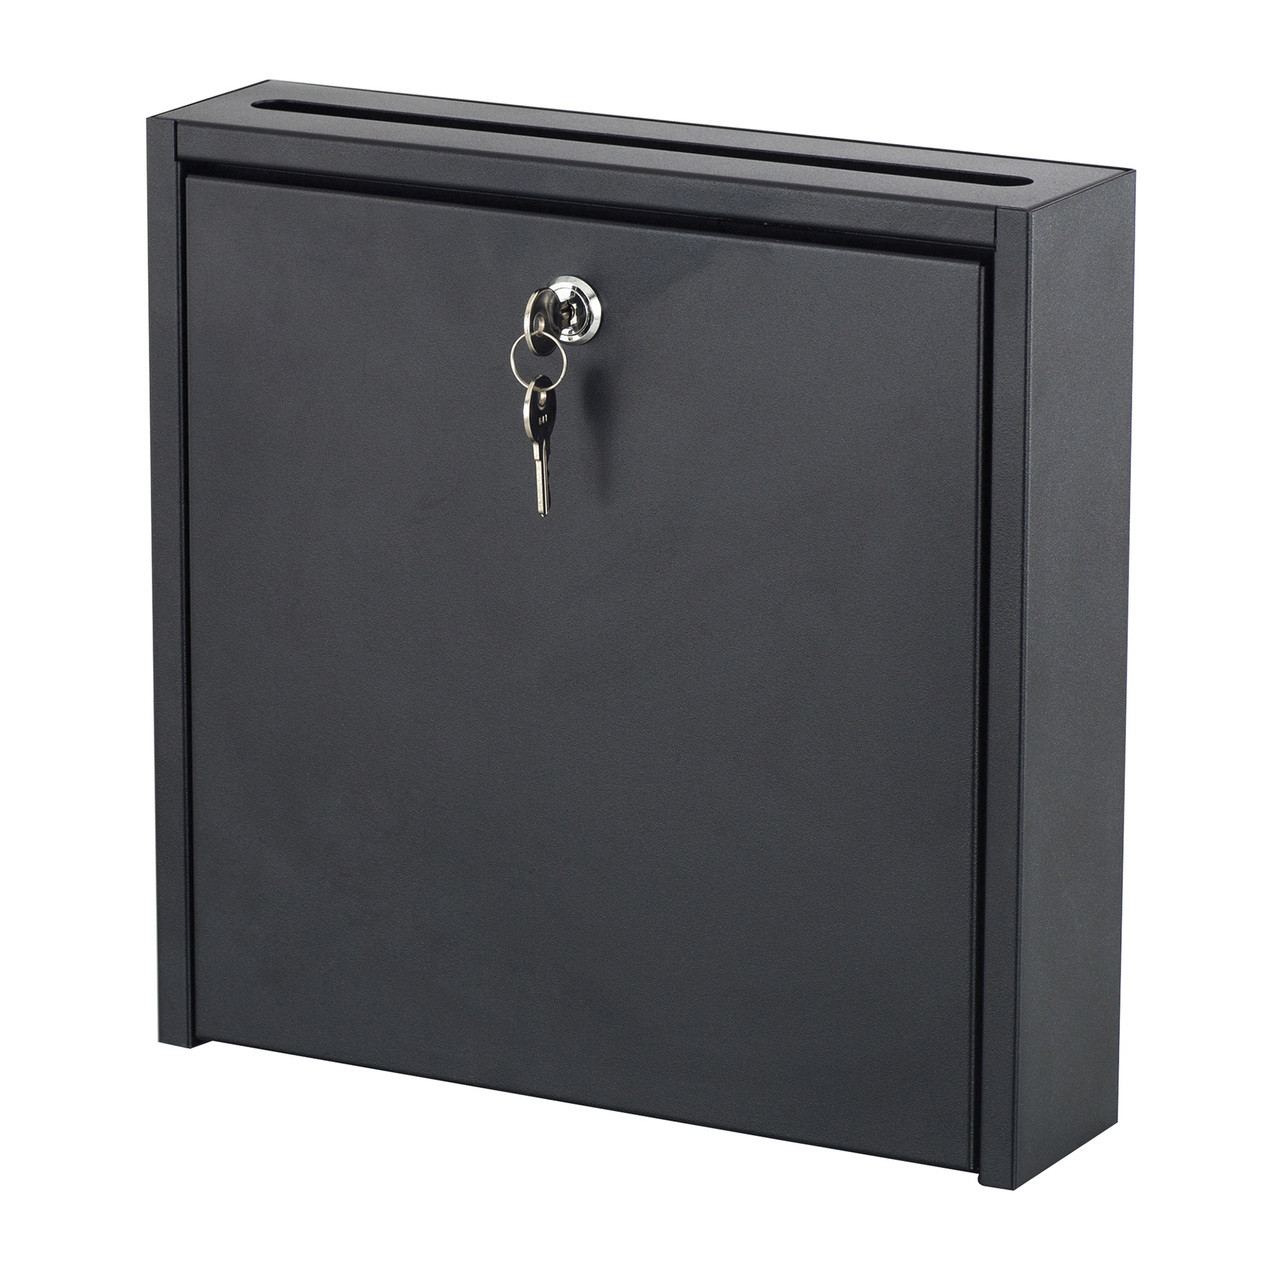 12 x 12" Wall-Mounted Interoffice Mailbox with Lock